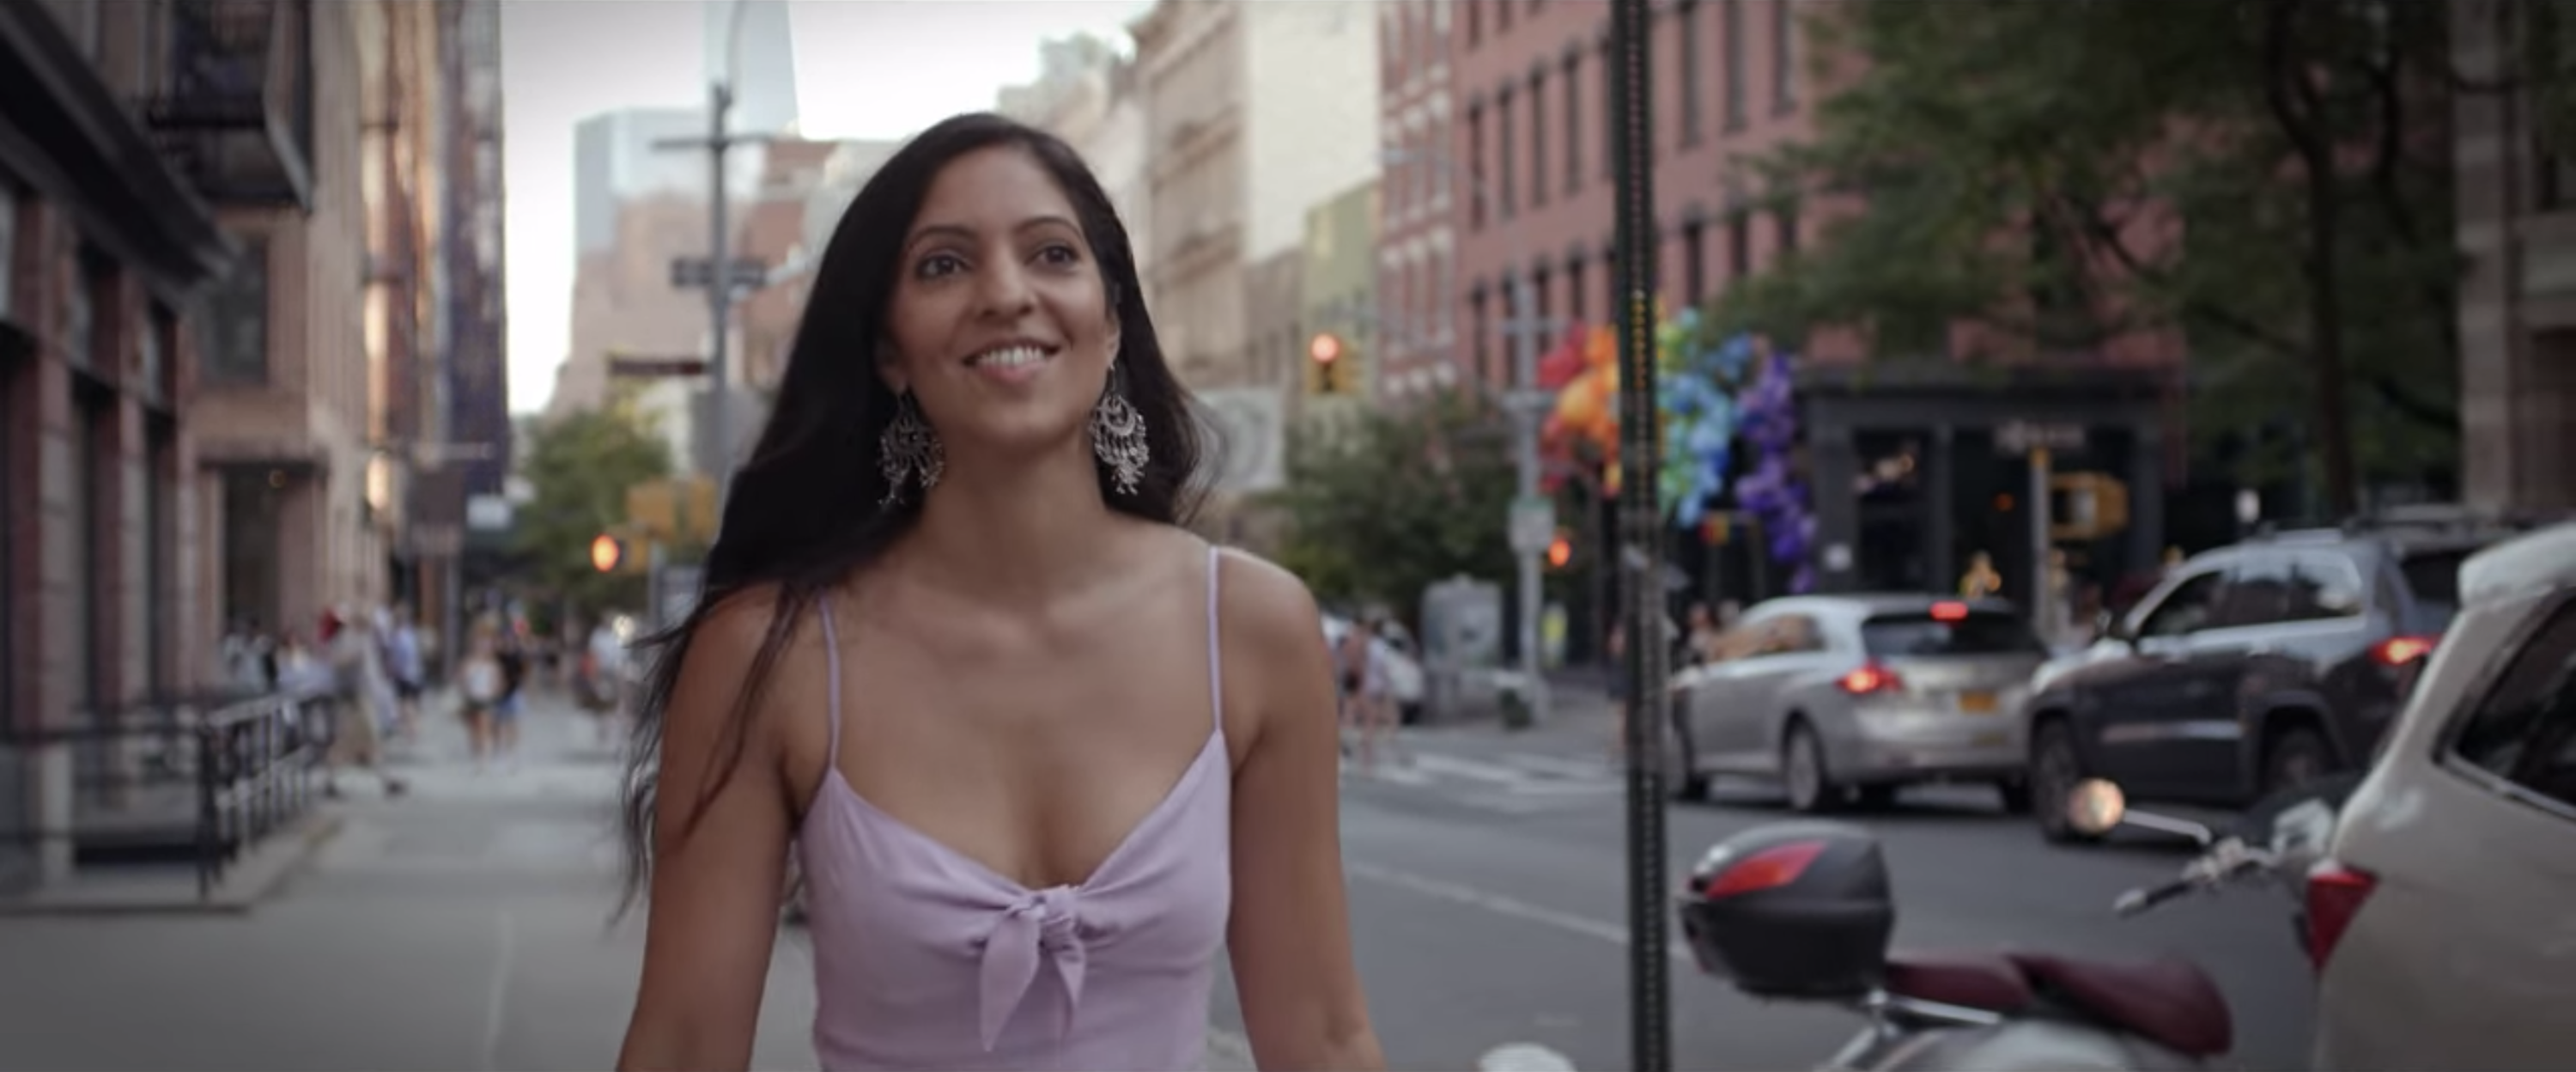 Gurki from &quot;Dating Around&quot; walks with a smile through New York, happily single